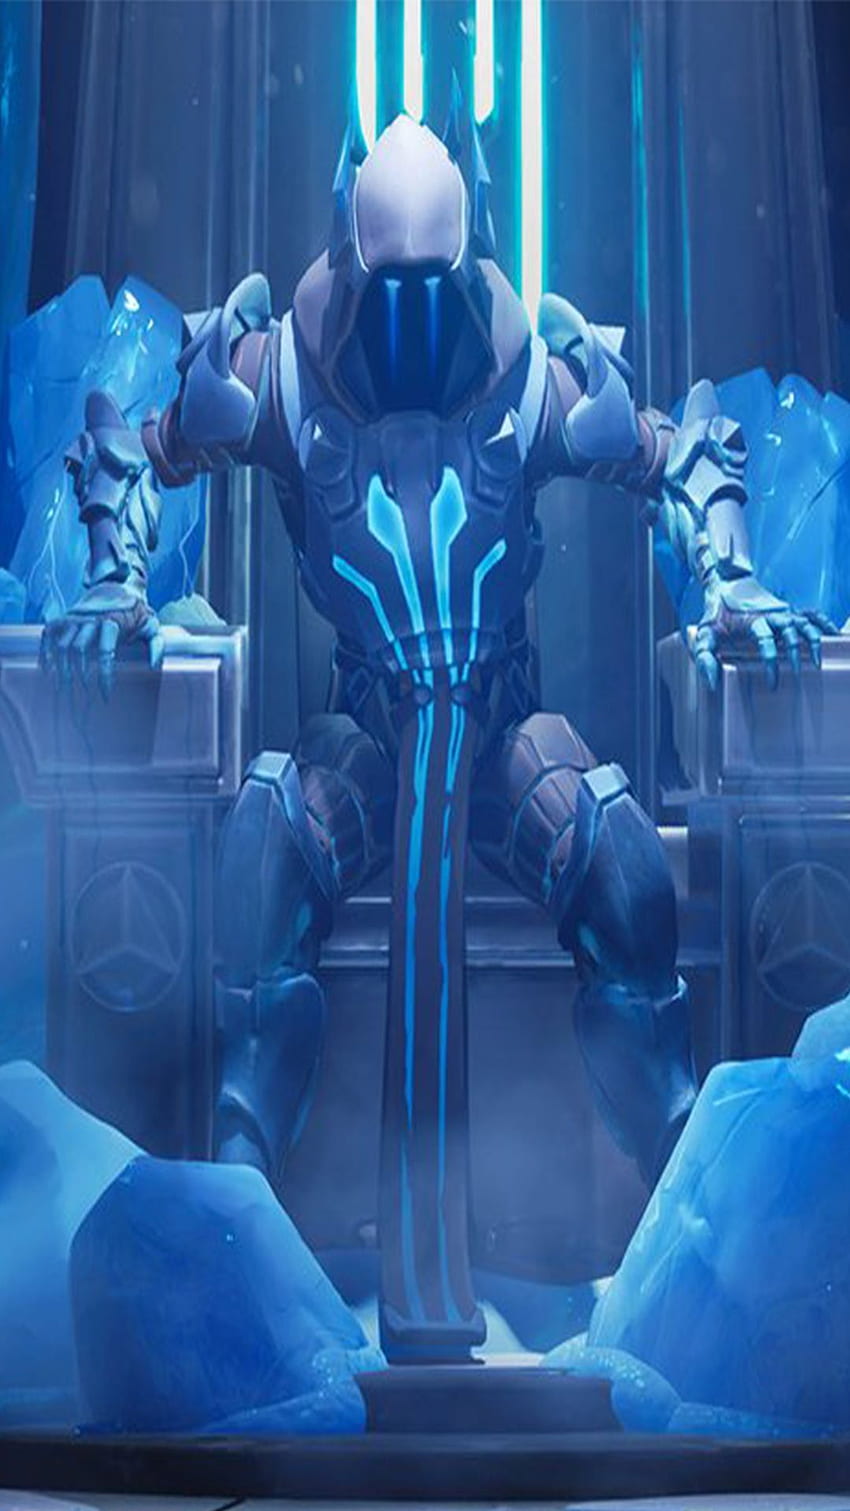 falls off a chair on the ceiling and falls onto ice kings floor oof in 2021. Ice king, Game iphone, Best gaming HD phone wallpaper